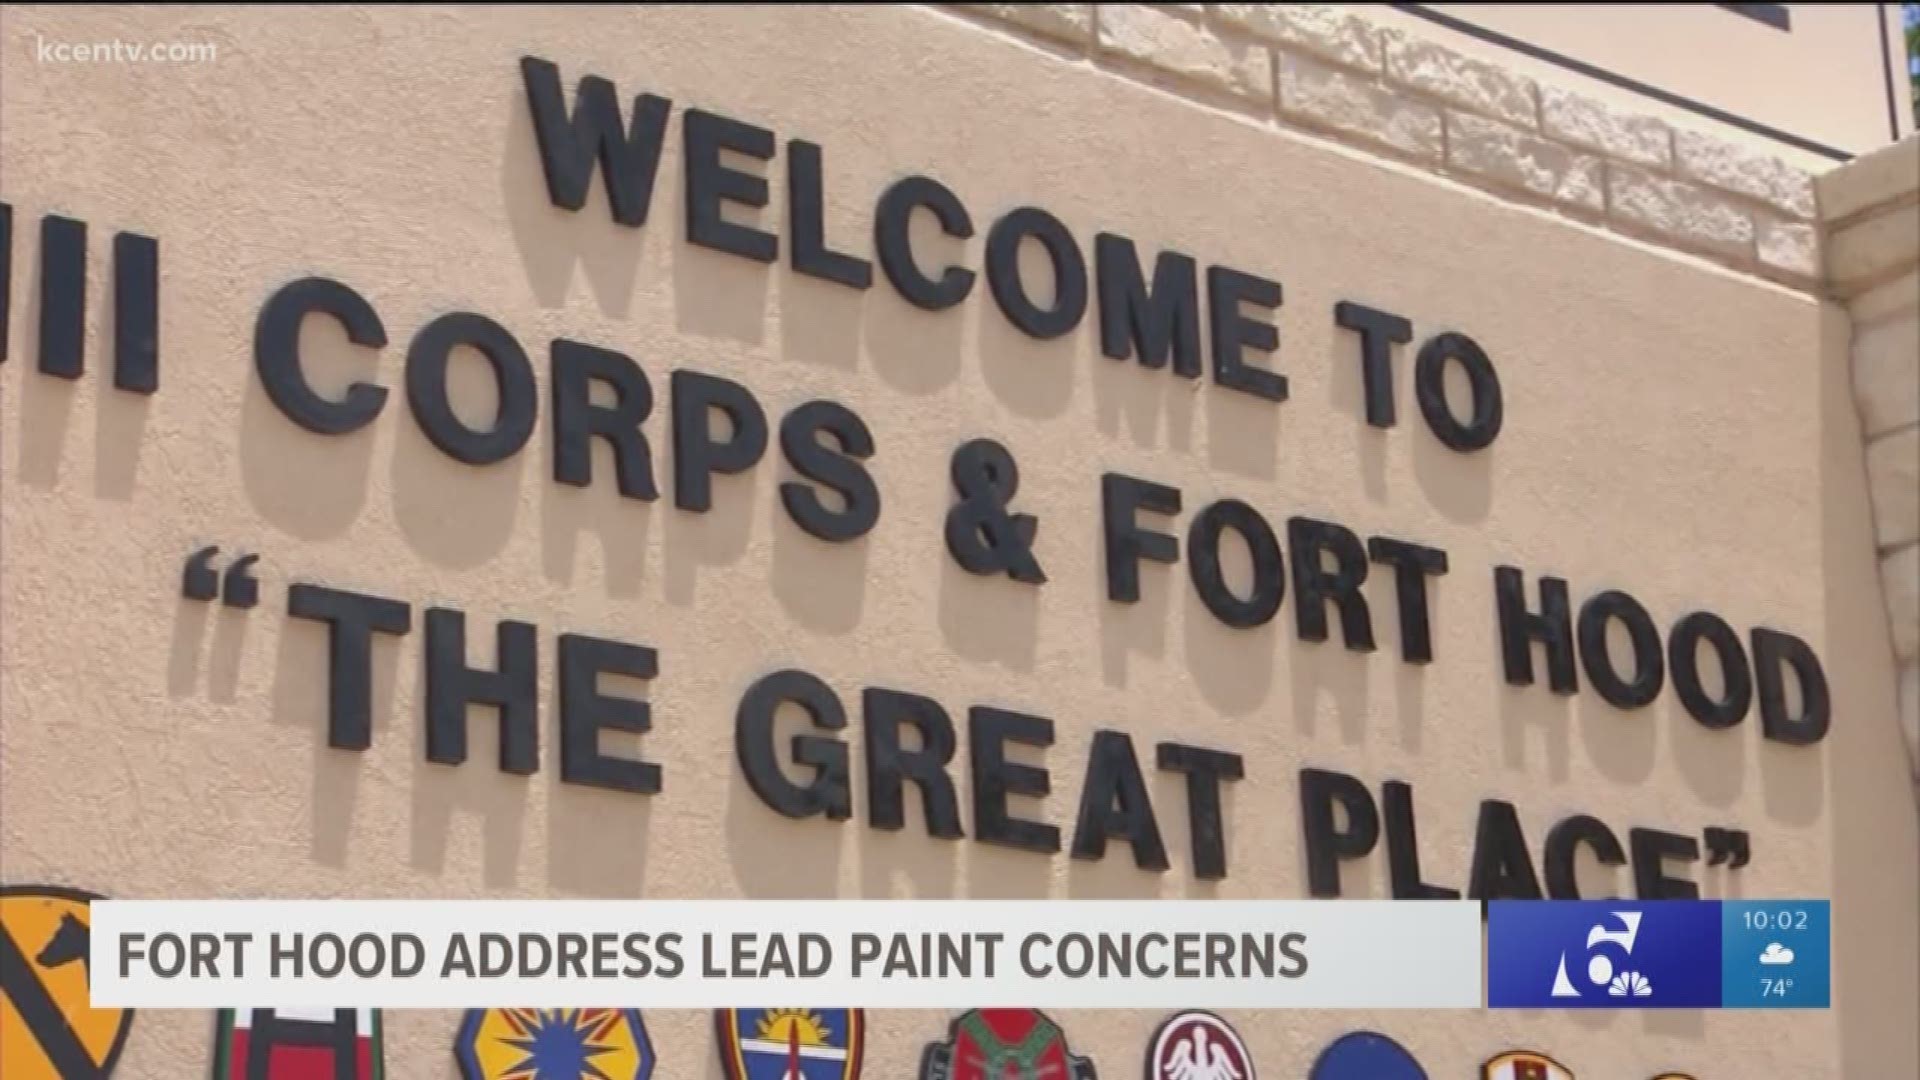 Following a Reuter's magazine article U.S. army bases are hosting town halls to talk about lead paint in homes